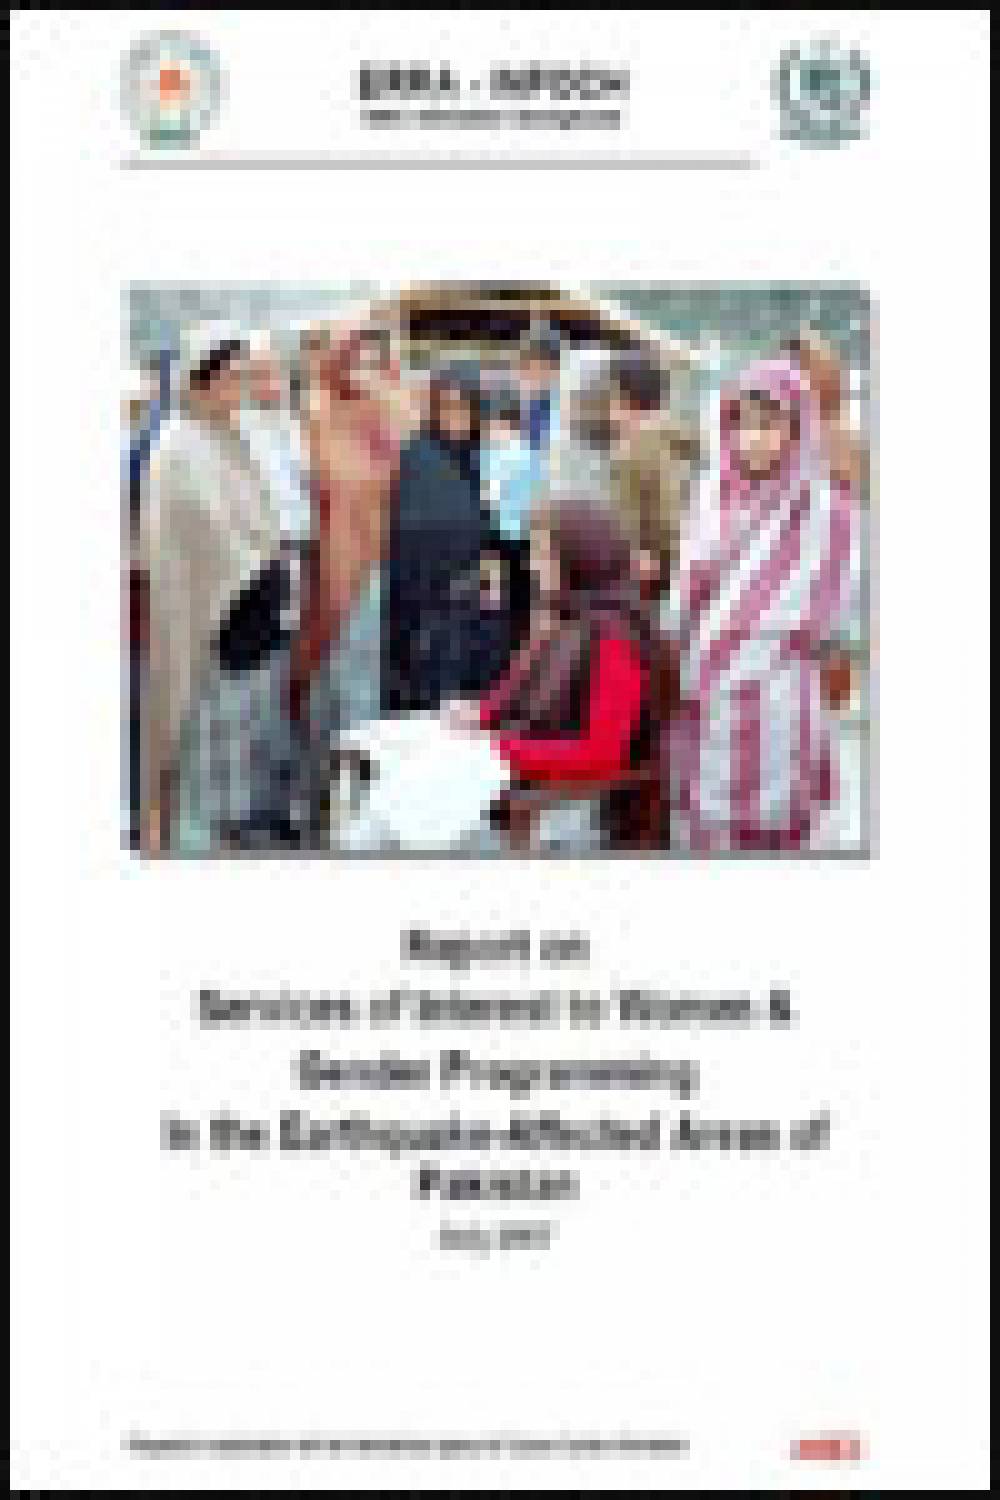 Report on Services of Interest to Women & Gender Programming In the Earthquake-Affected Areas of Pakistan